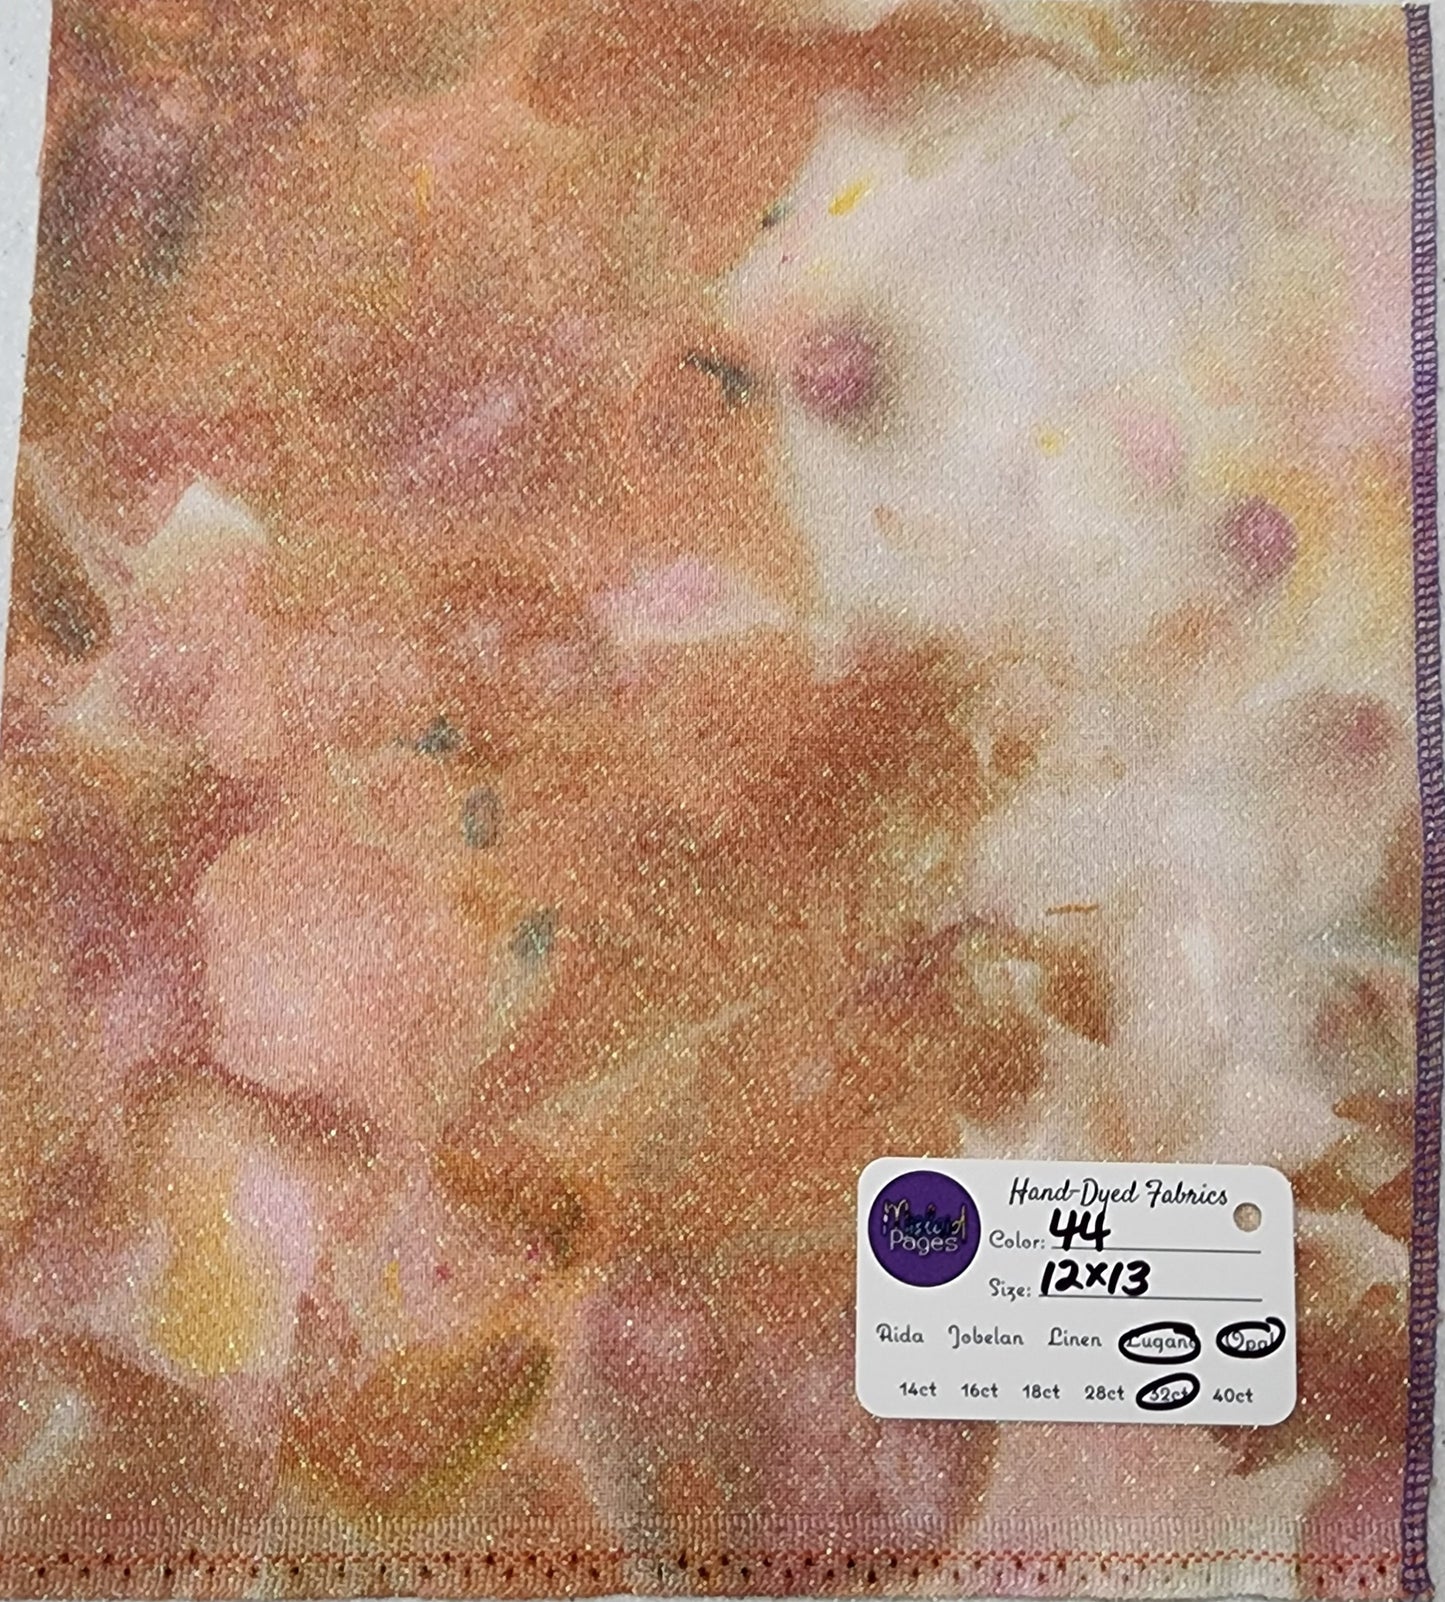 32ct Opal Lugana - "Autumn's Bounty" Lot #44 - Hand-Dyed Fabric - October 2022 Release